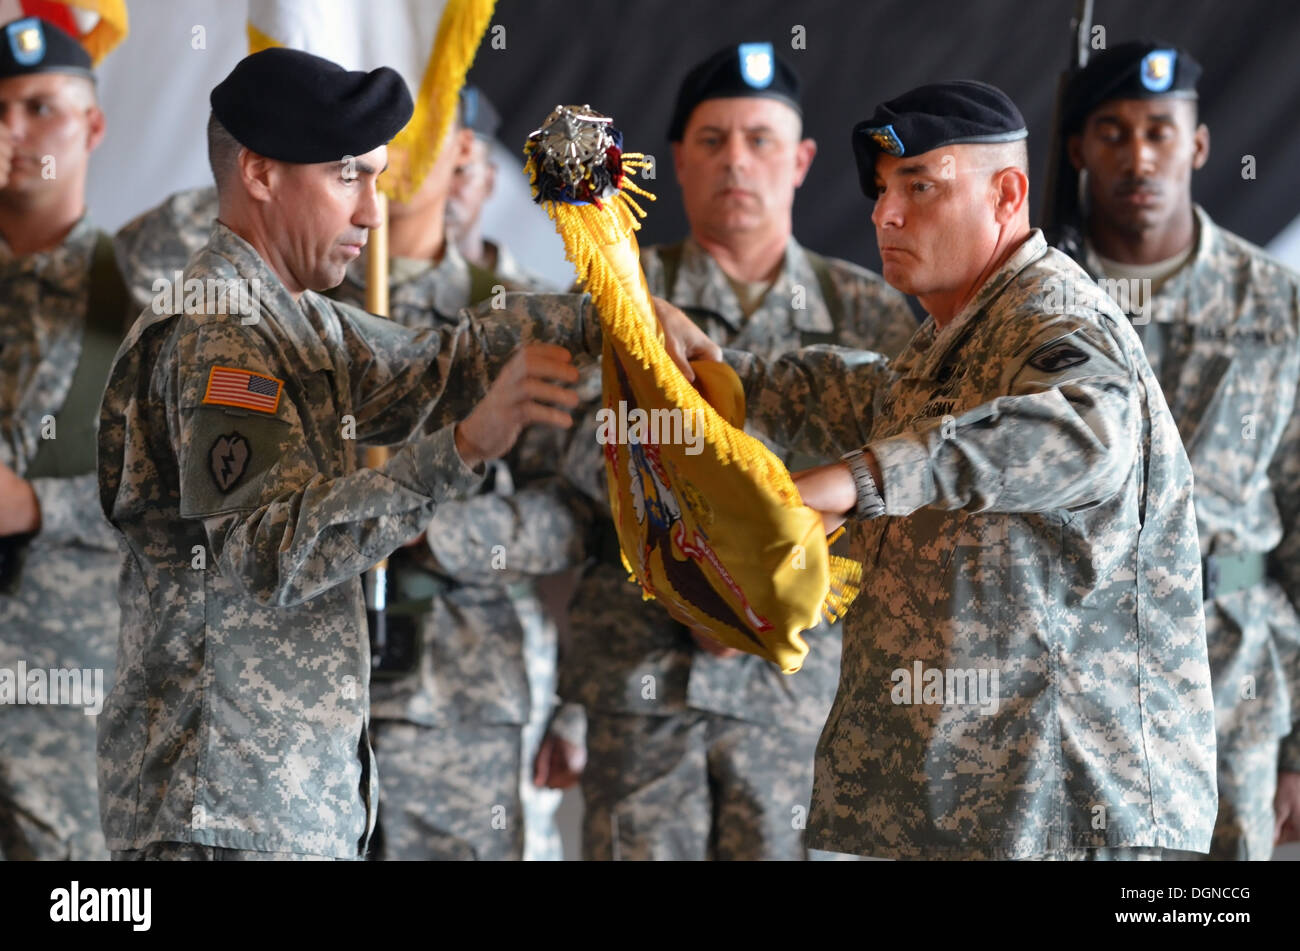 The commander of 4th Attack Reconnaissance Squadron, 6th Cavalry Regiment, Lt. Col. Brian Watkins, and the senior enlisted advisor to the commander, Command Sgt. Maj. Stanley Williams, uncase the unit's colors Oct. 18, 2013 at Camp Humphreys. Stock Photo